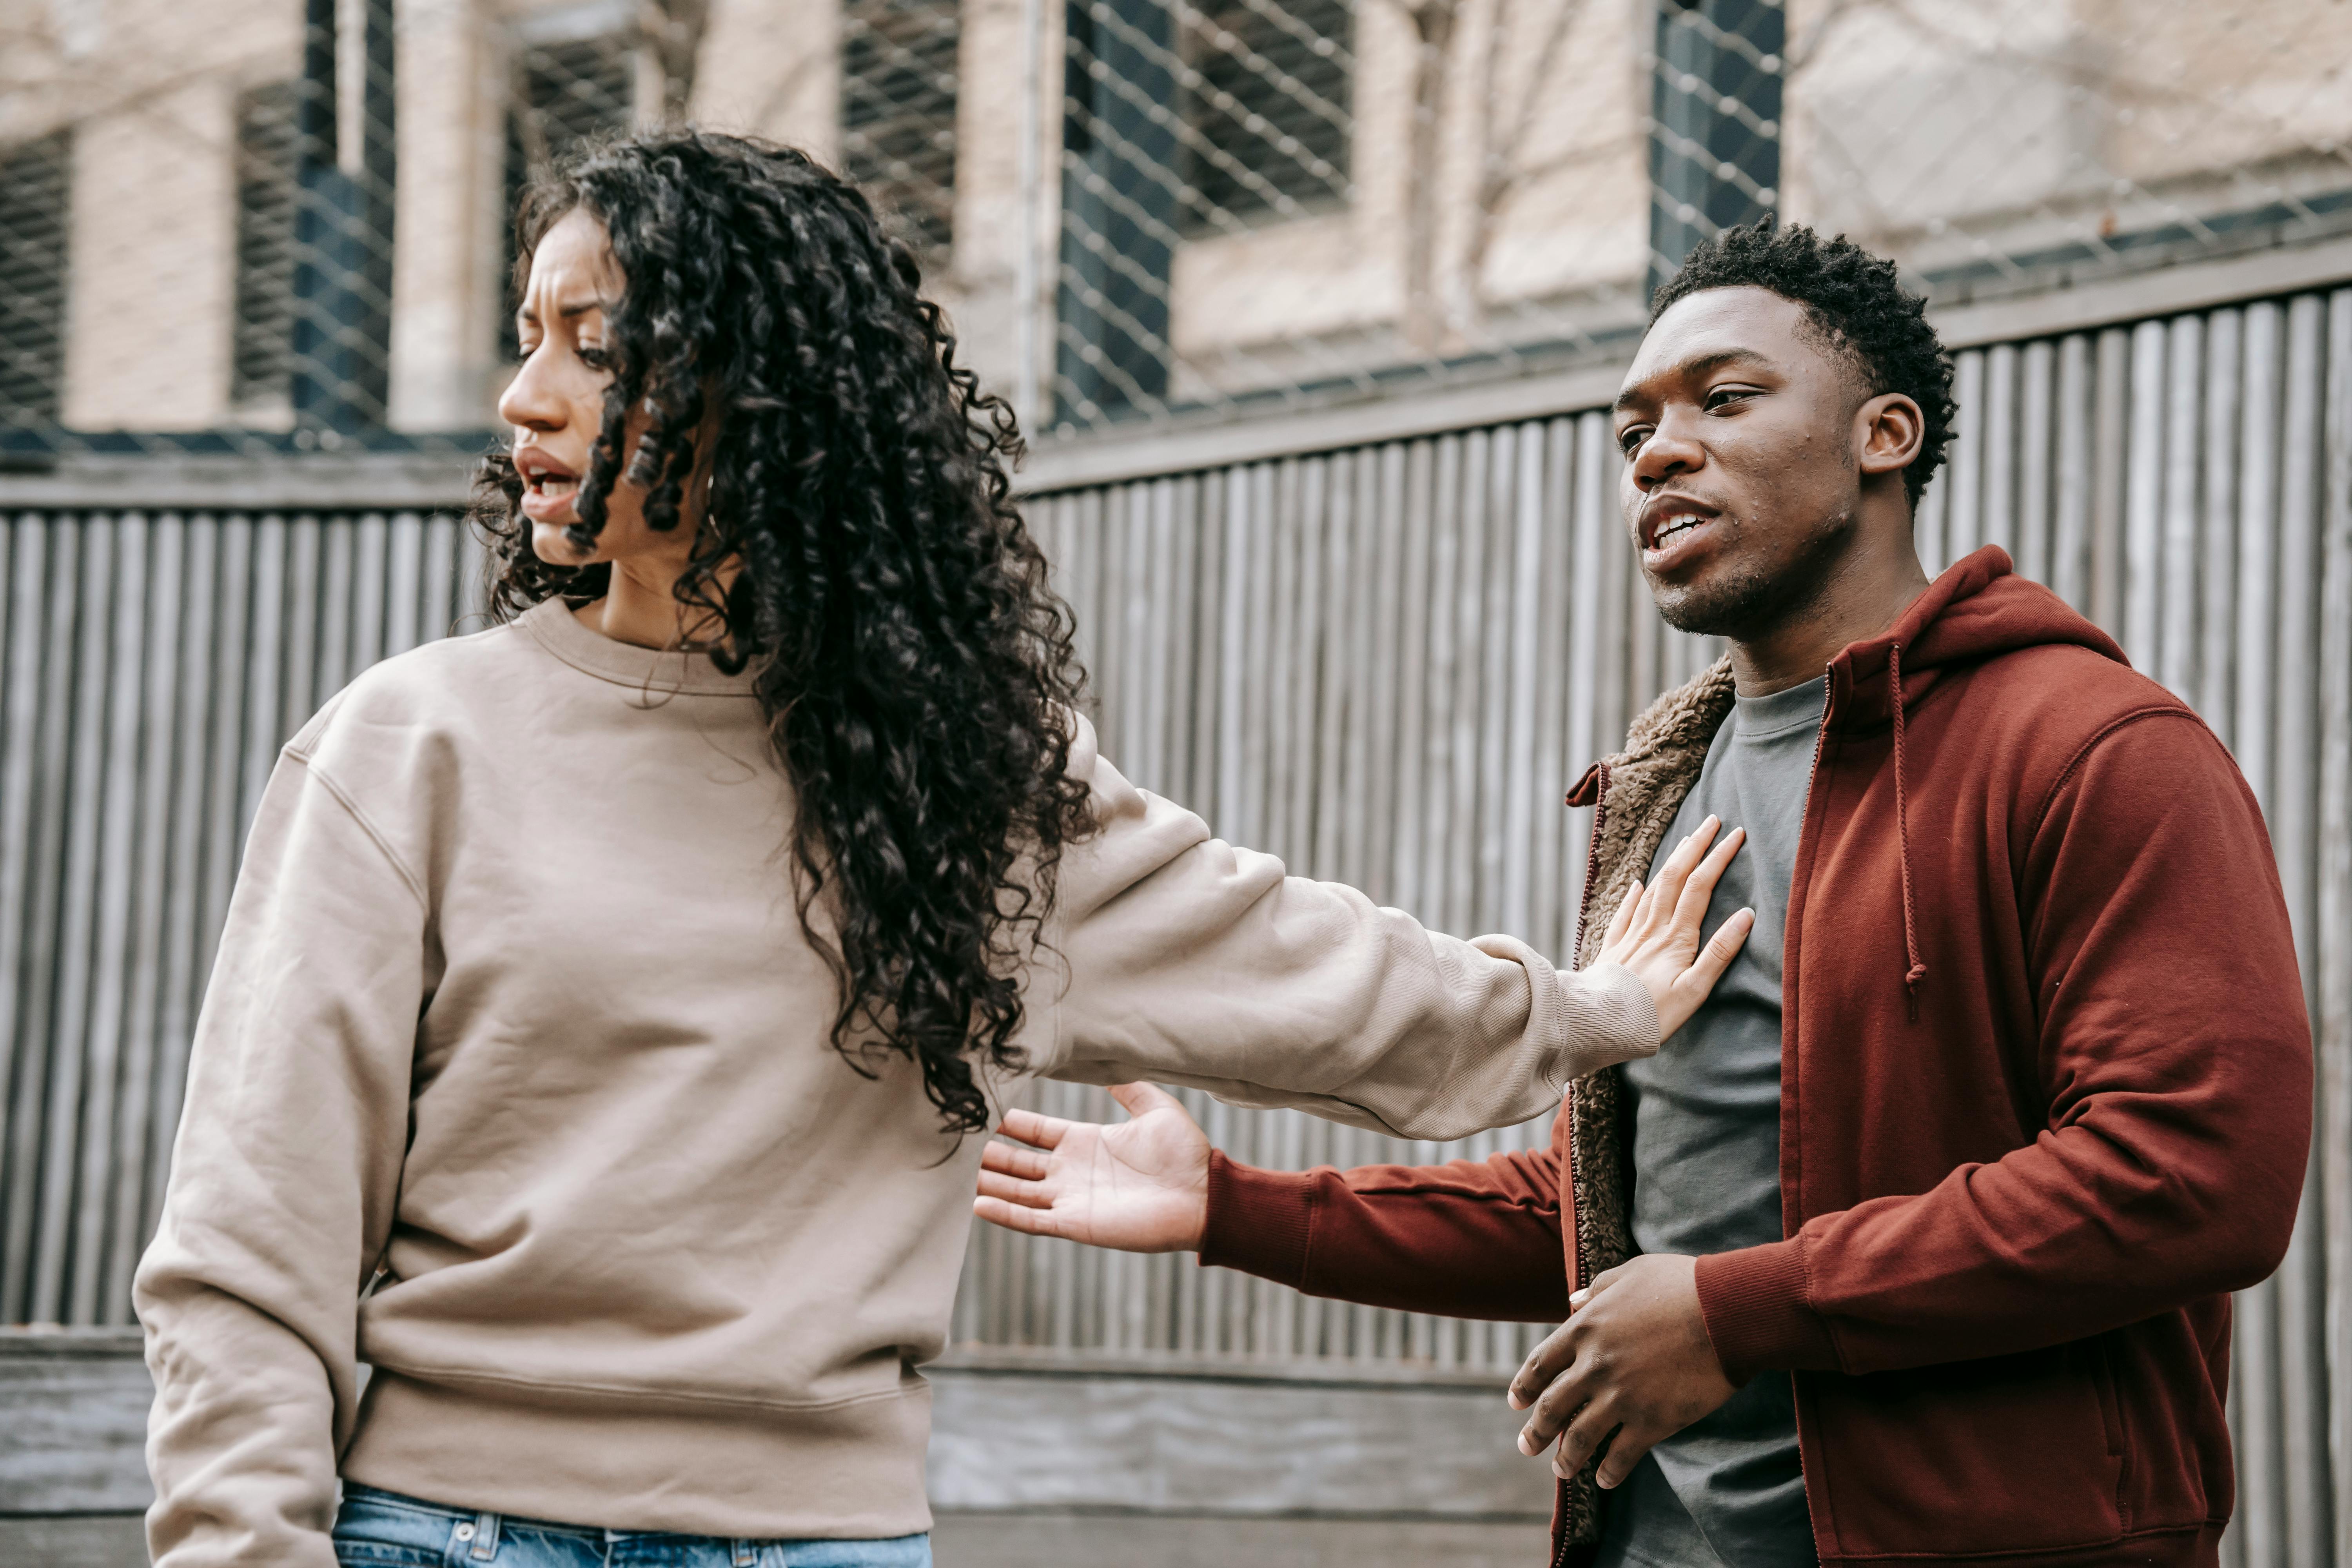 A woman and a man fighting | Source: Pexels